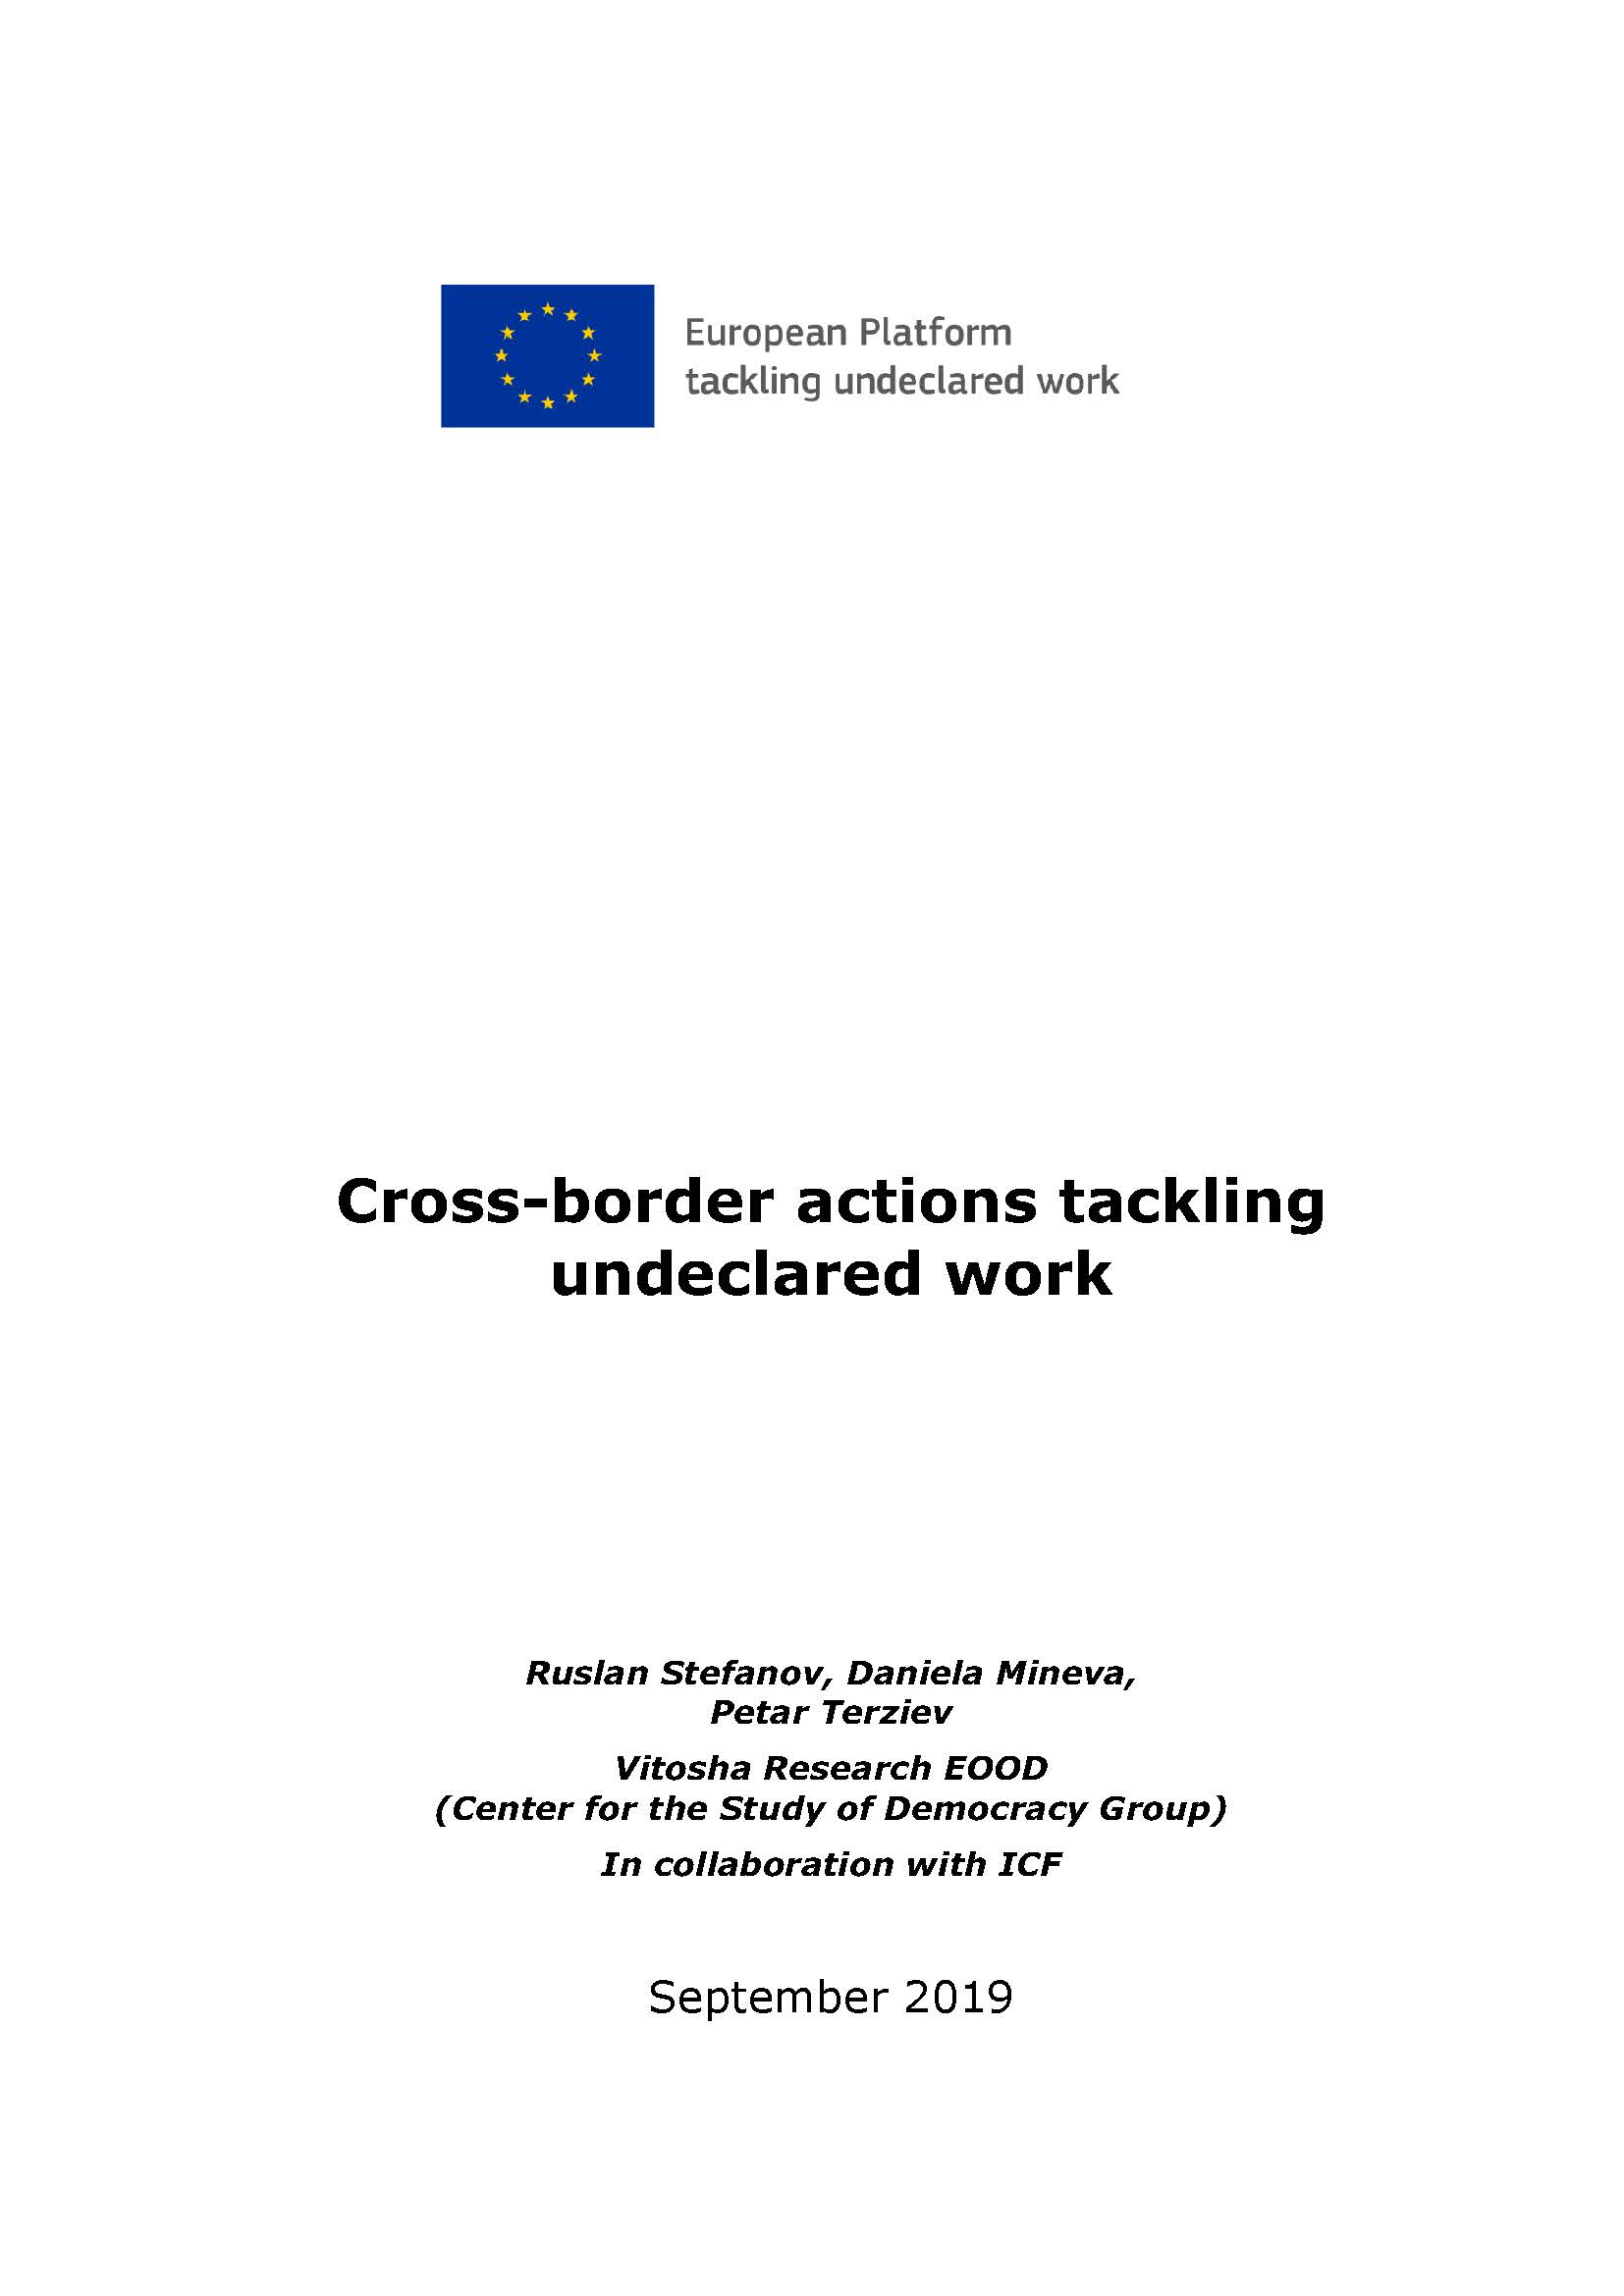 Cross-border actions tackling undeclared work